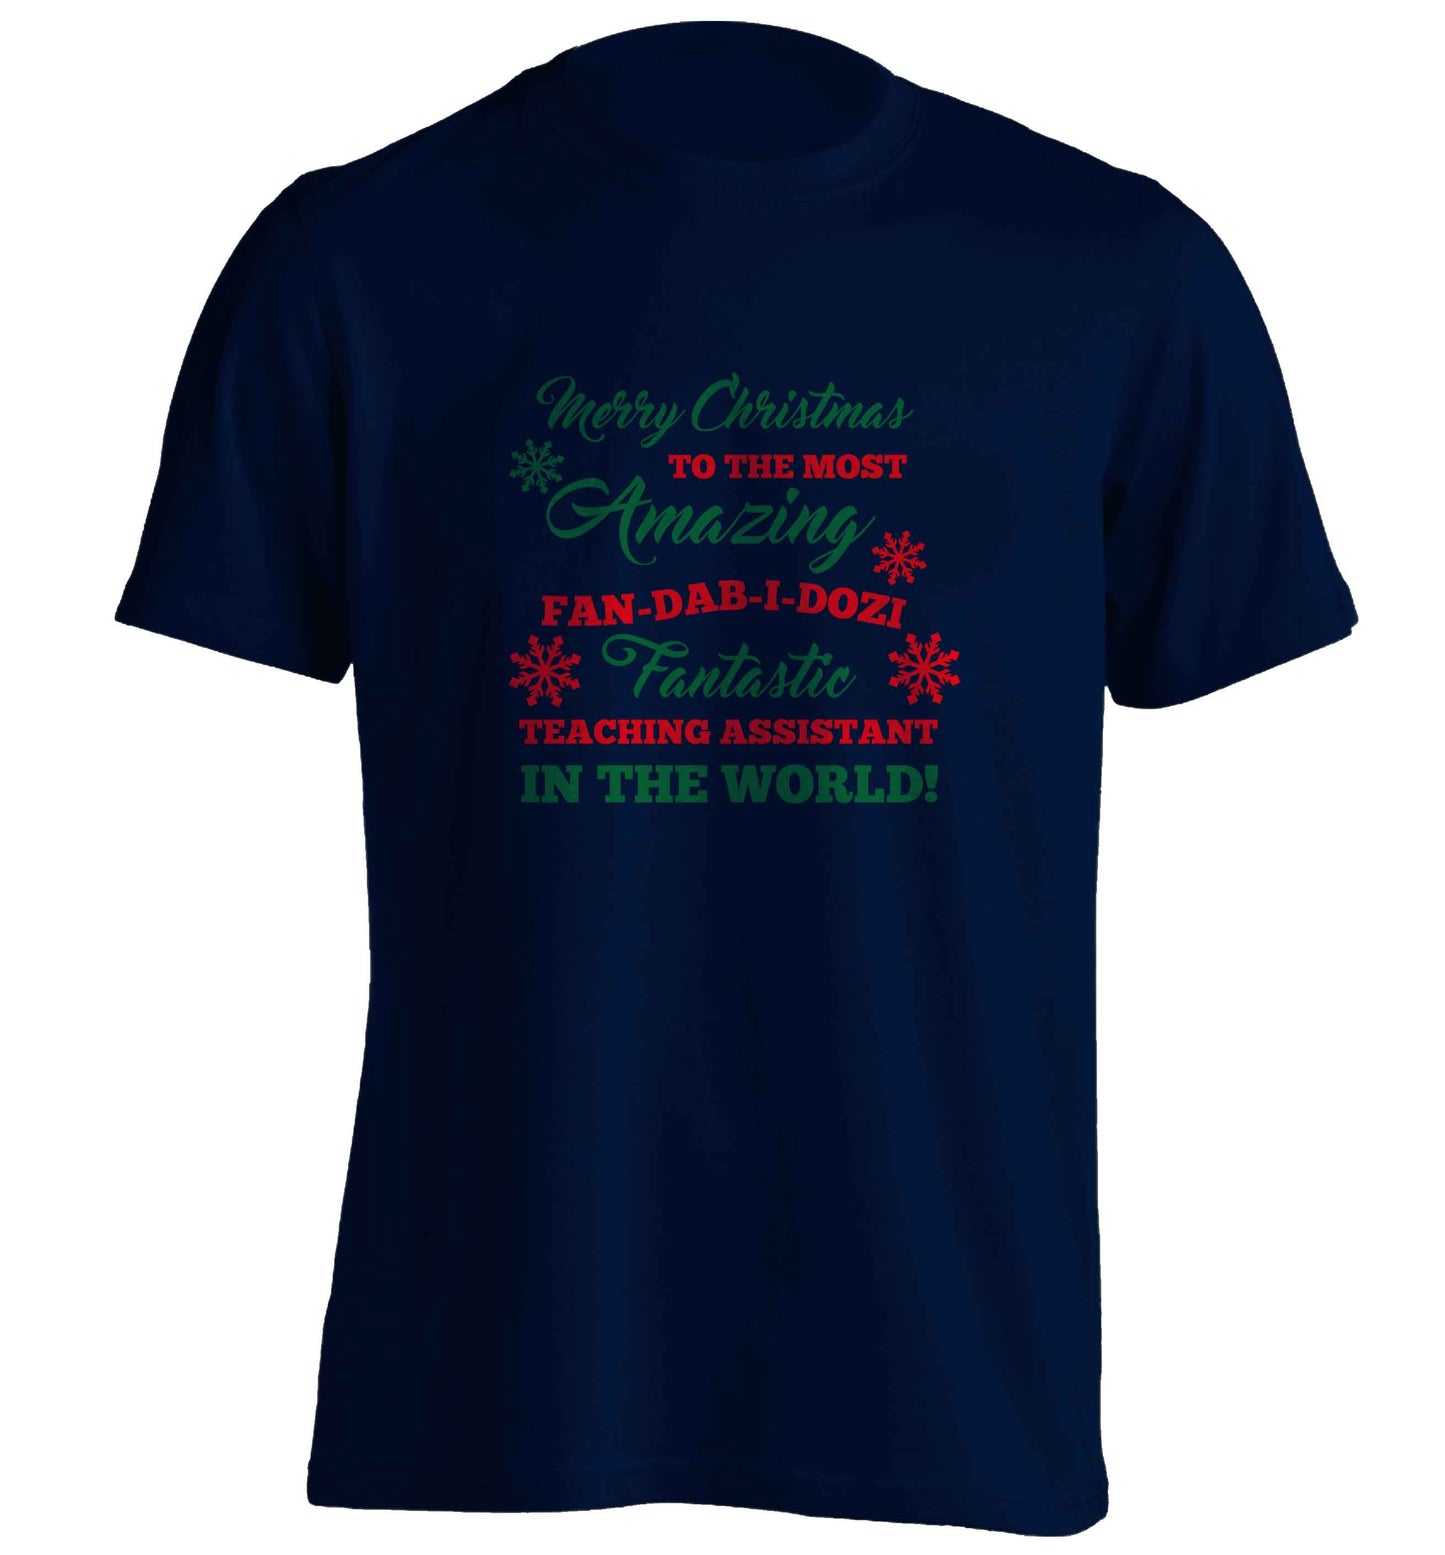 Merry Christmas to the most amazing fan-dab-i-dozi fantasic teaching assistant in the world adults unisex navy Tshirt 2XL